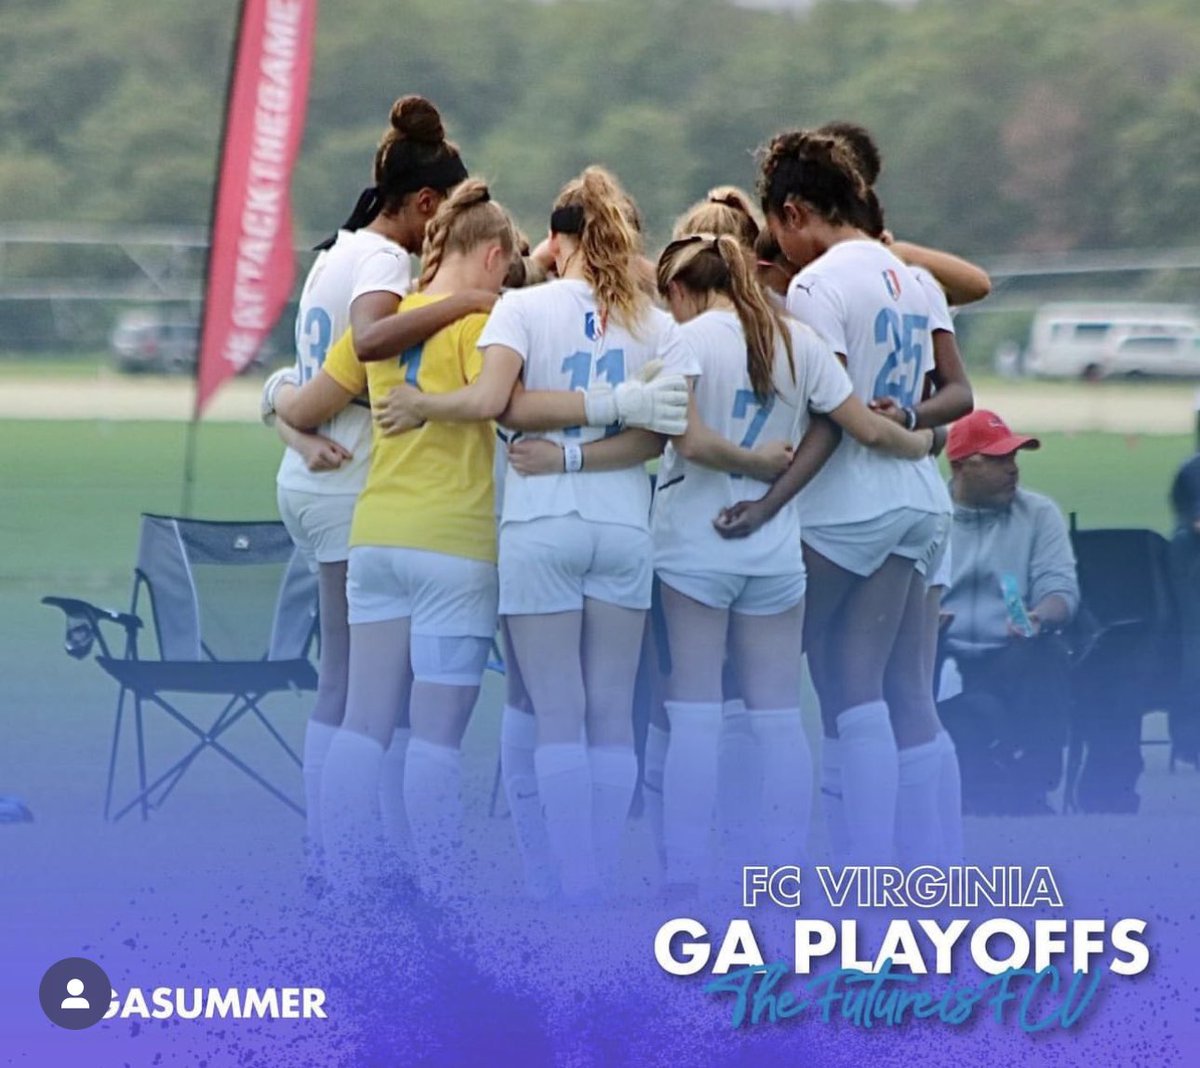 Next up…@GAcademyLeague Quarterfinals!! Came back after Game 1… fought to win the next two as a team! #NotDoneYet #Classof2025 #WeAreOne @TSJ_FCVirginia @bobbypup @CCZ_FCV @tt7